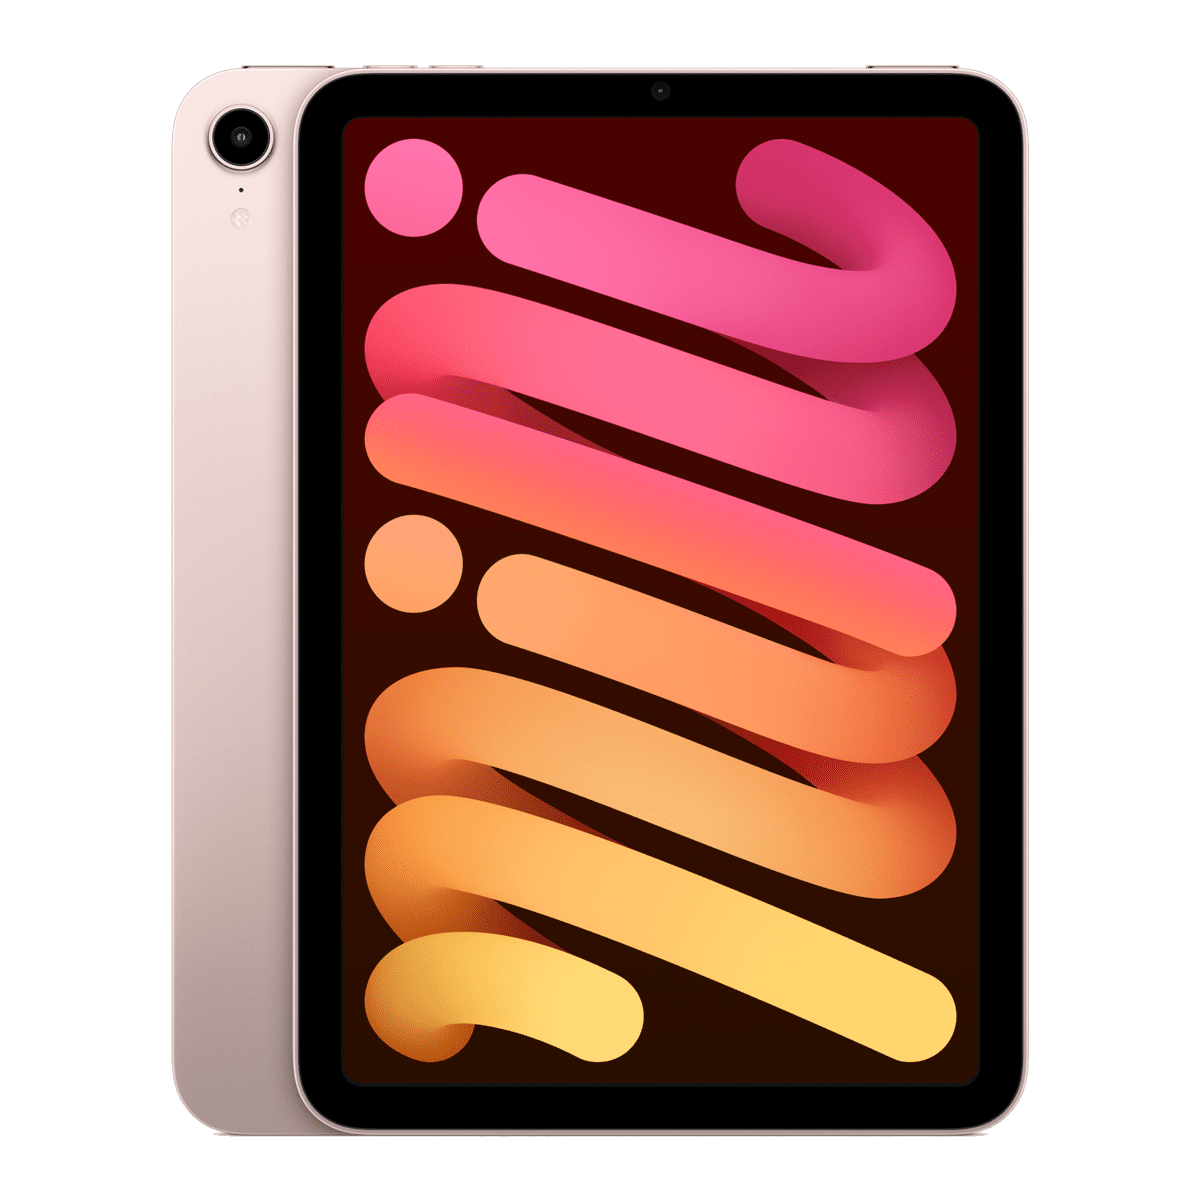 Apple iPad Mini Gen 6 - Why I Switched from the 11 Pro 